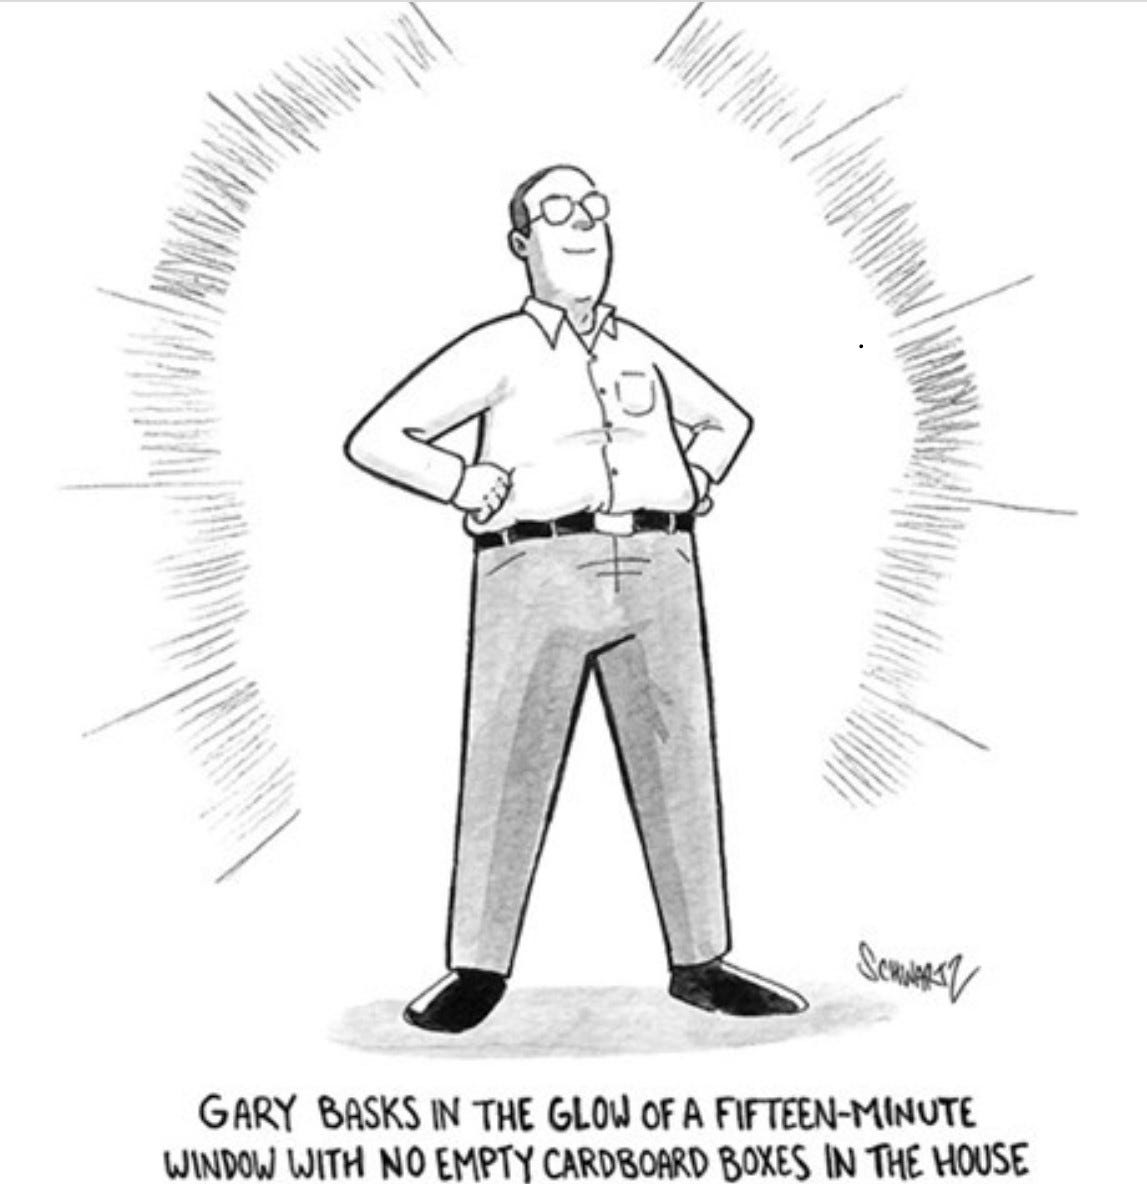 new yorker cartoon gary basks in the glow of no empty boxes in the house